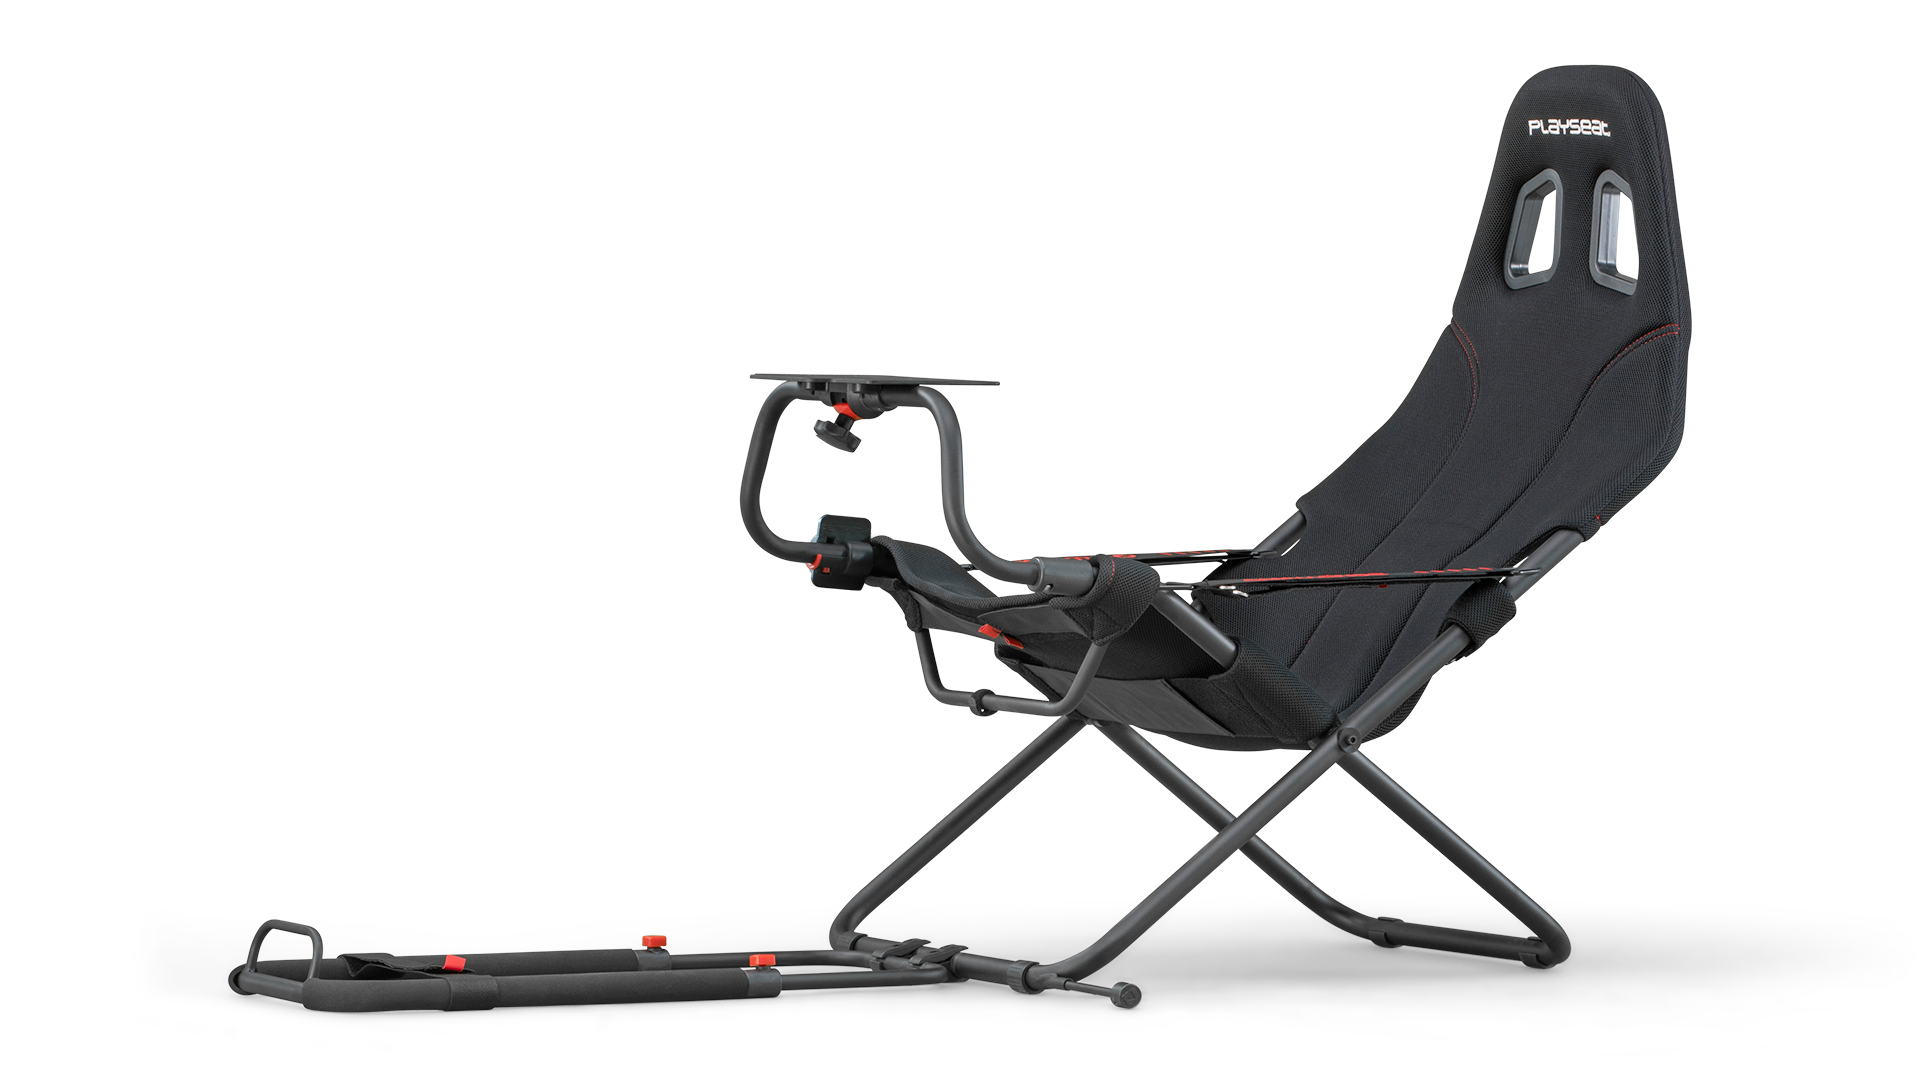 playseat-challenge-black-actifit-racing-seat-front-angle-view-1920x1080.png